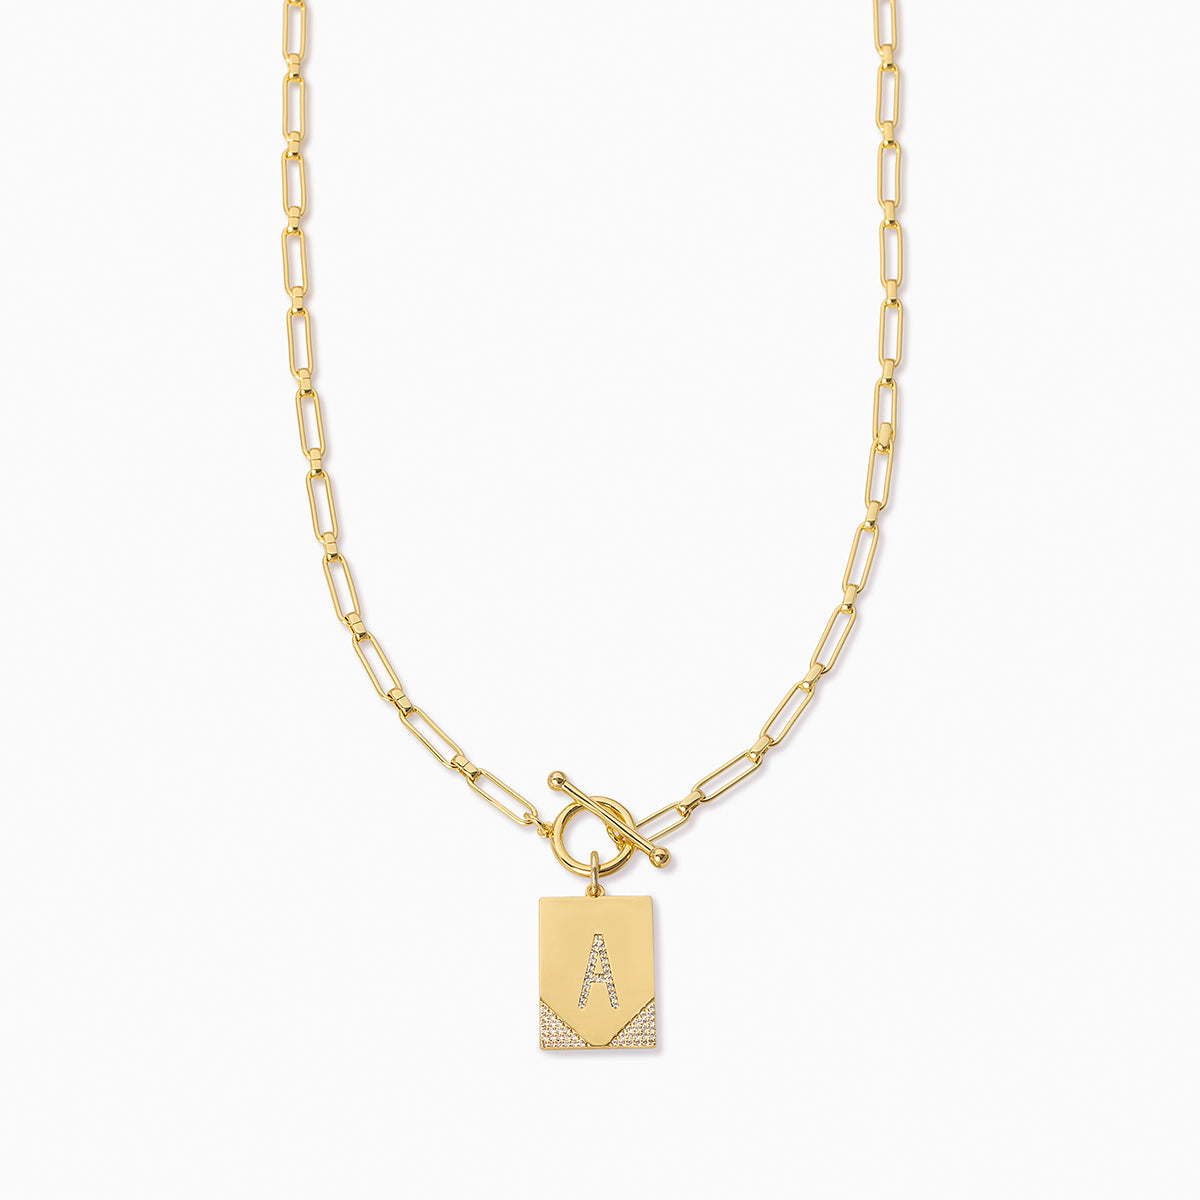 Leave Your Mark Chain Necklace | Gold A | Product Image | Uncommon James